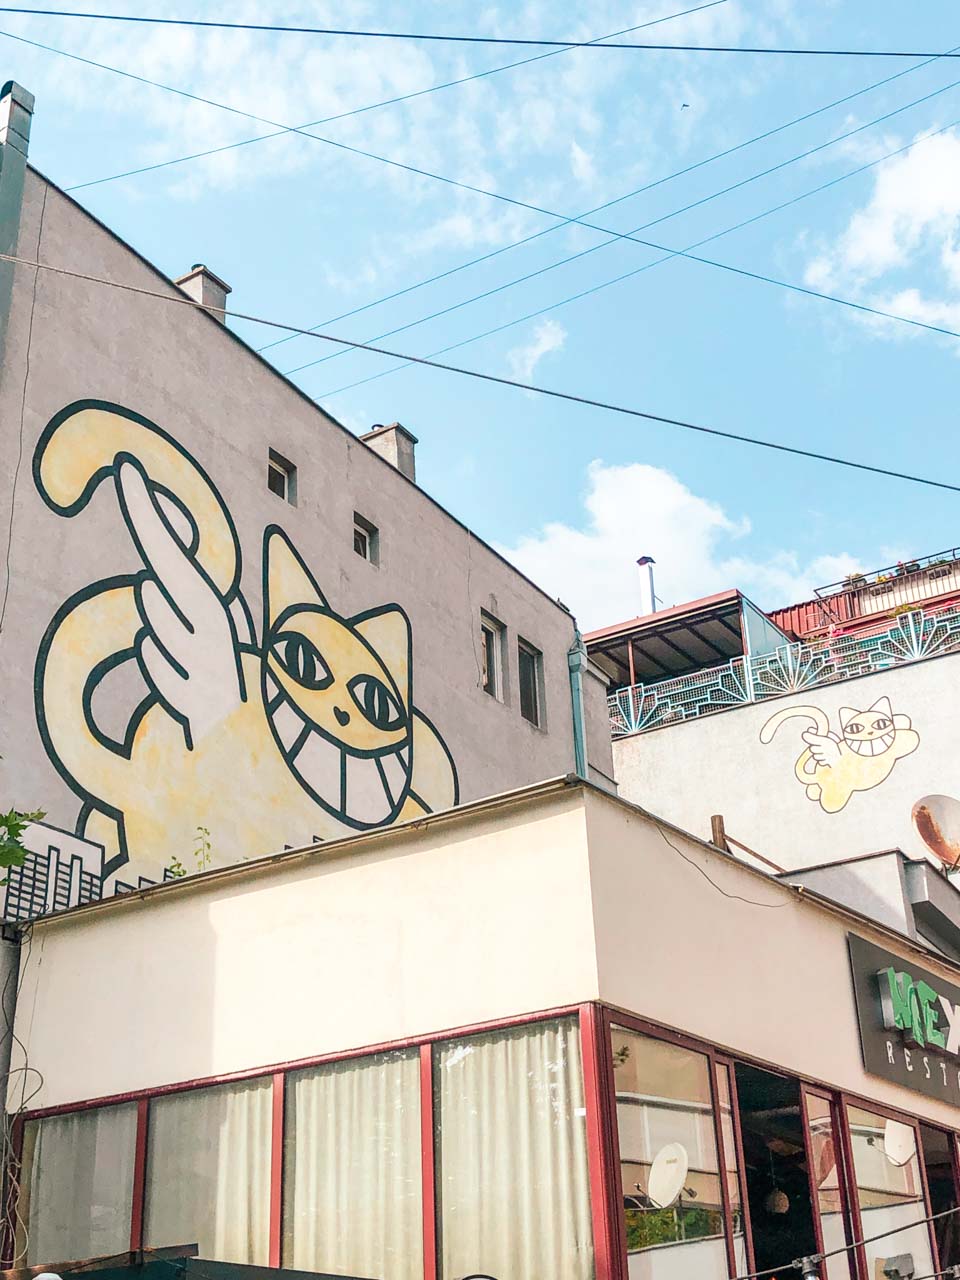 A building in Pristina, Kosovo with two identical cats painted on it